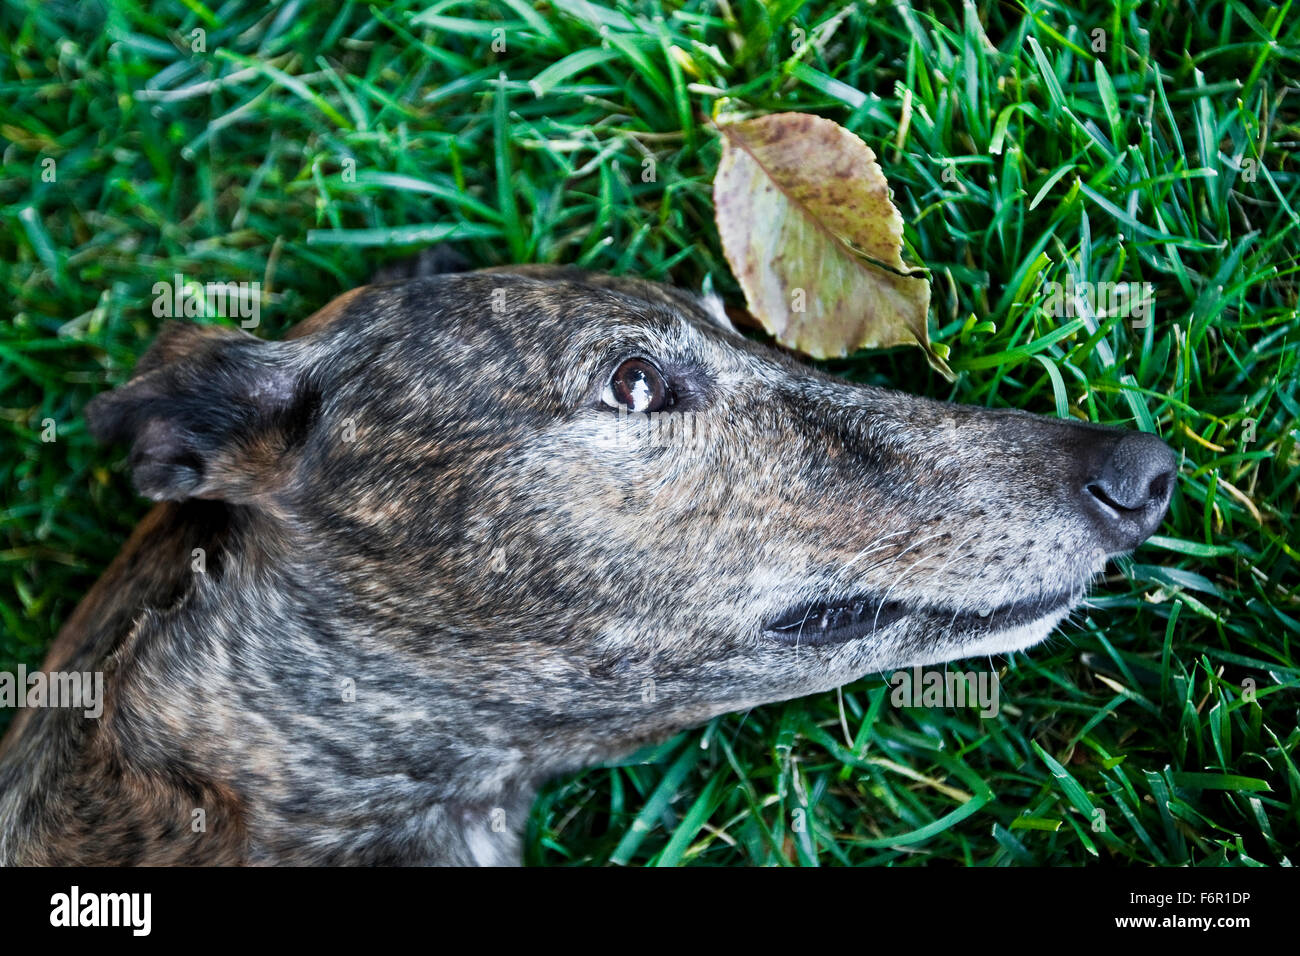 close up profile head of brindle Greyhound dog laying peacefully in rich long green grass with one single leaf Stock Photo